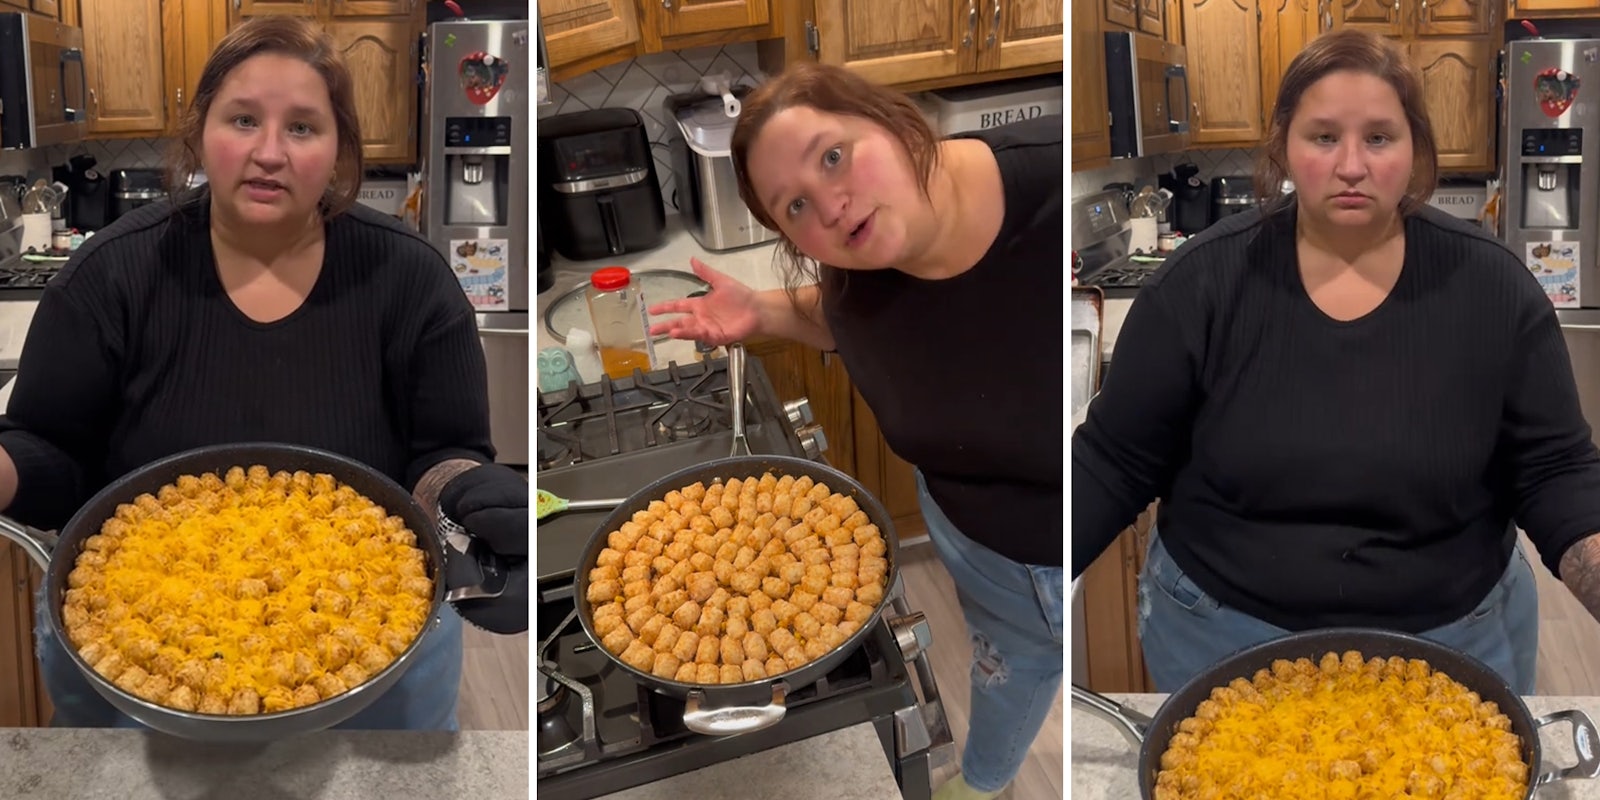 TikTok is obsessed with mom's 'aggressive cooking' tutorials